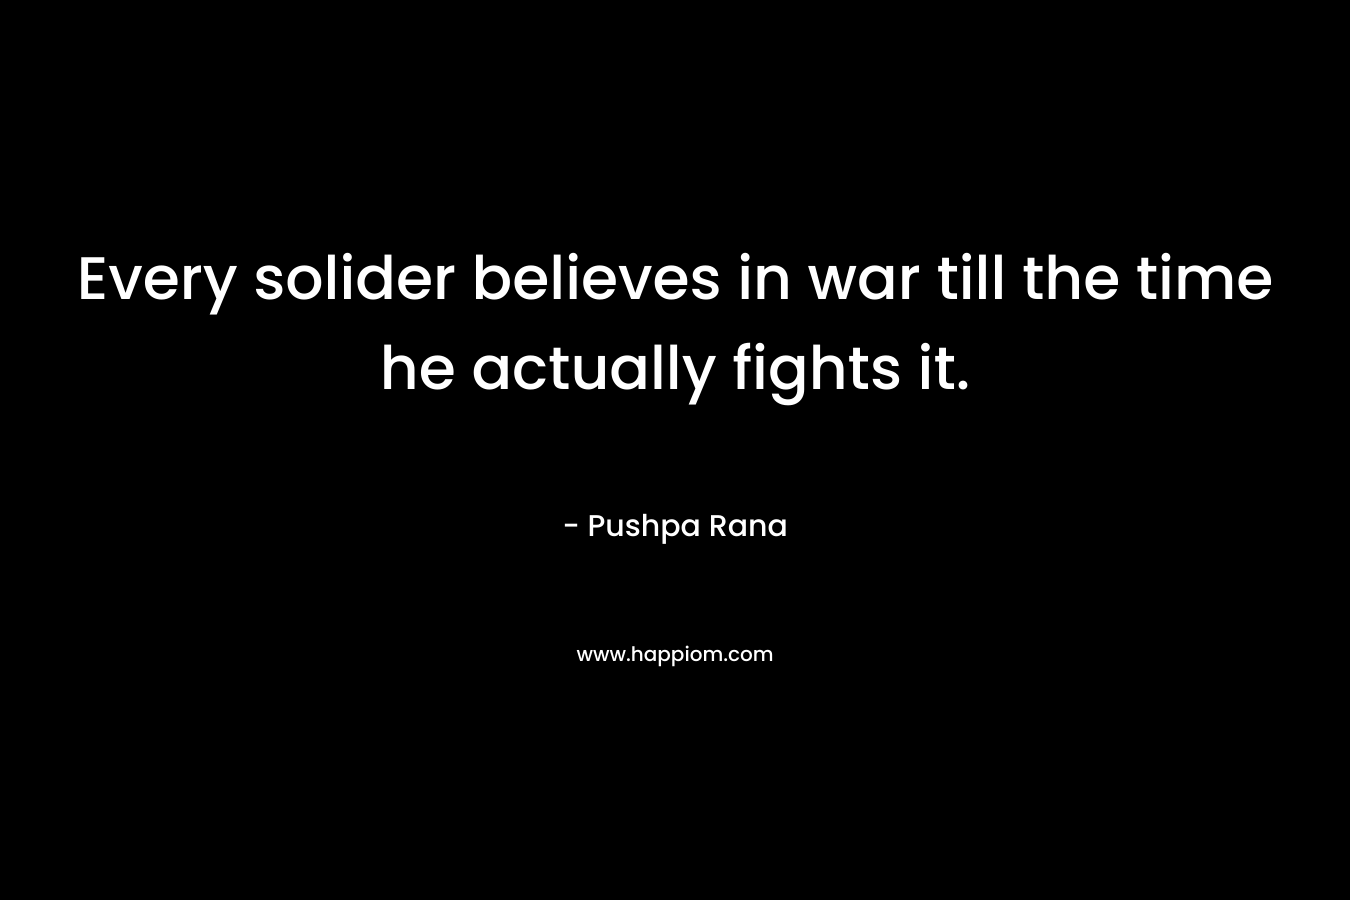 Every solider believes in war till the time he actually fights it. – Pushpa Rana